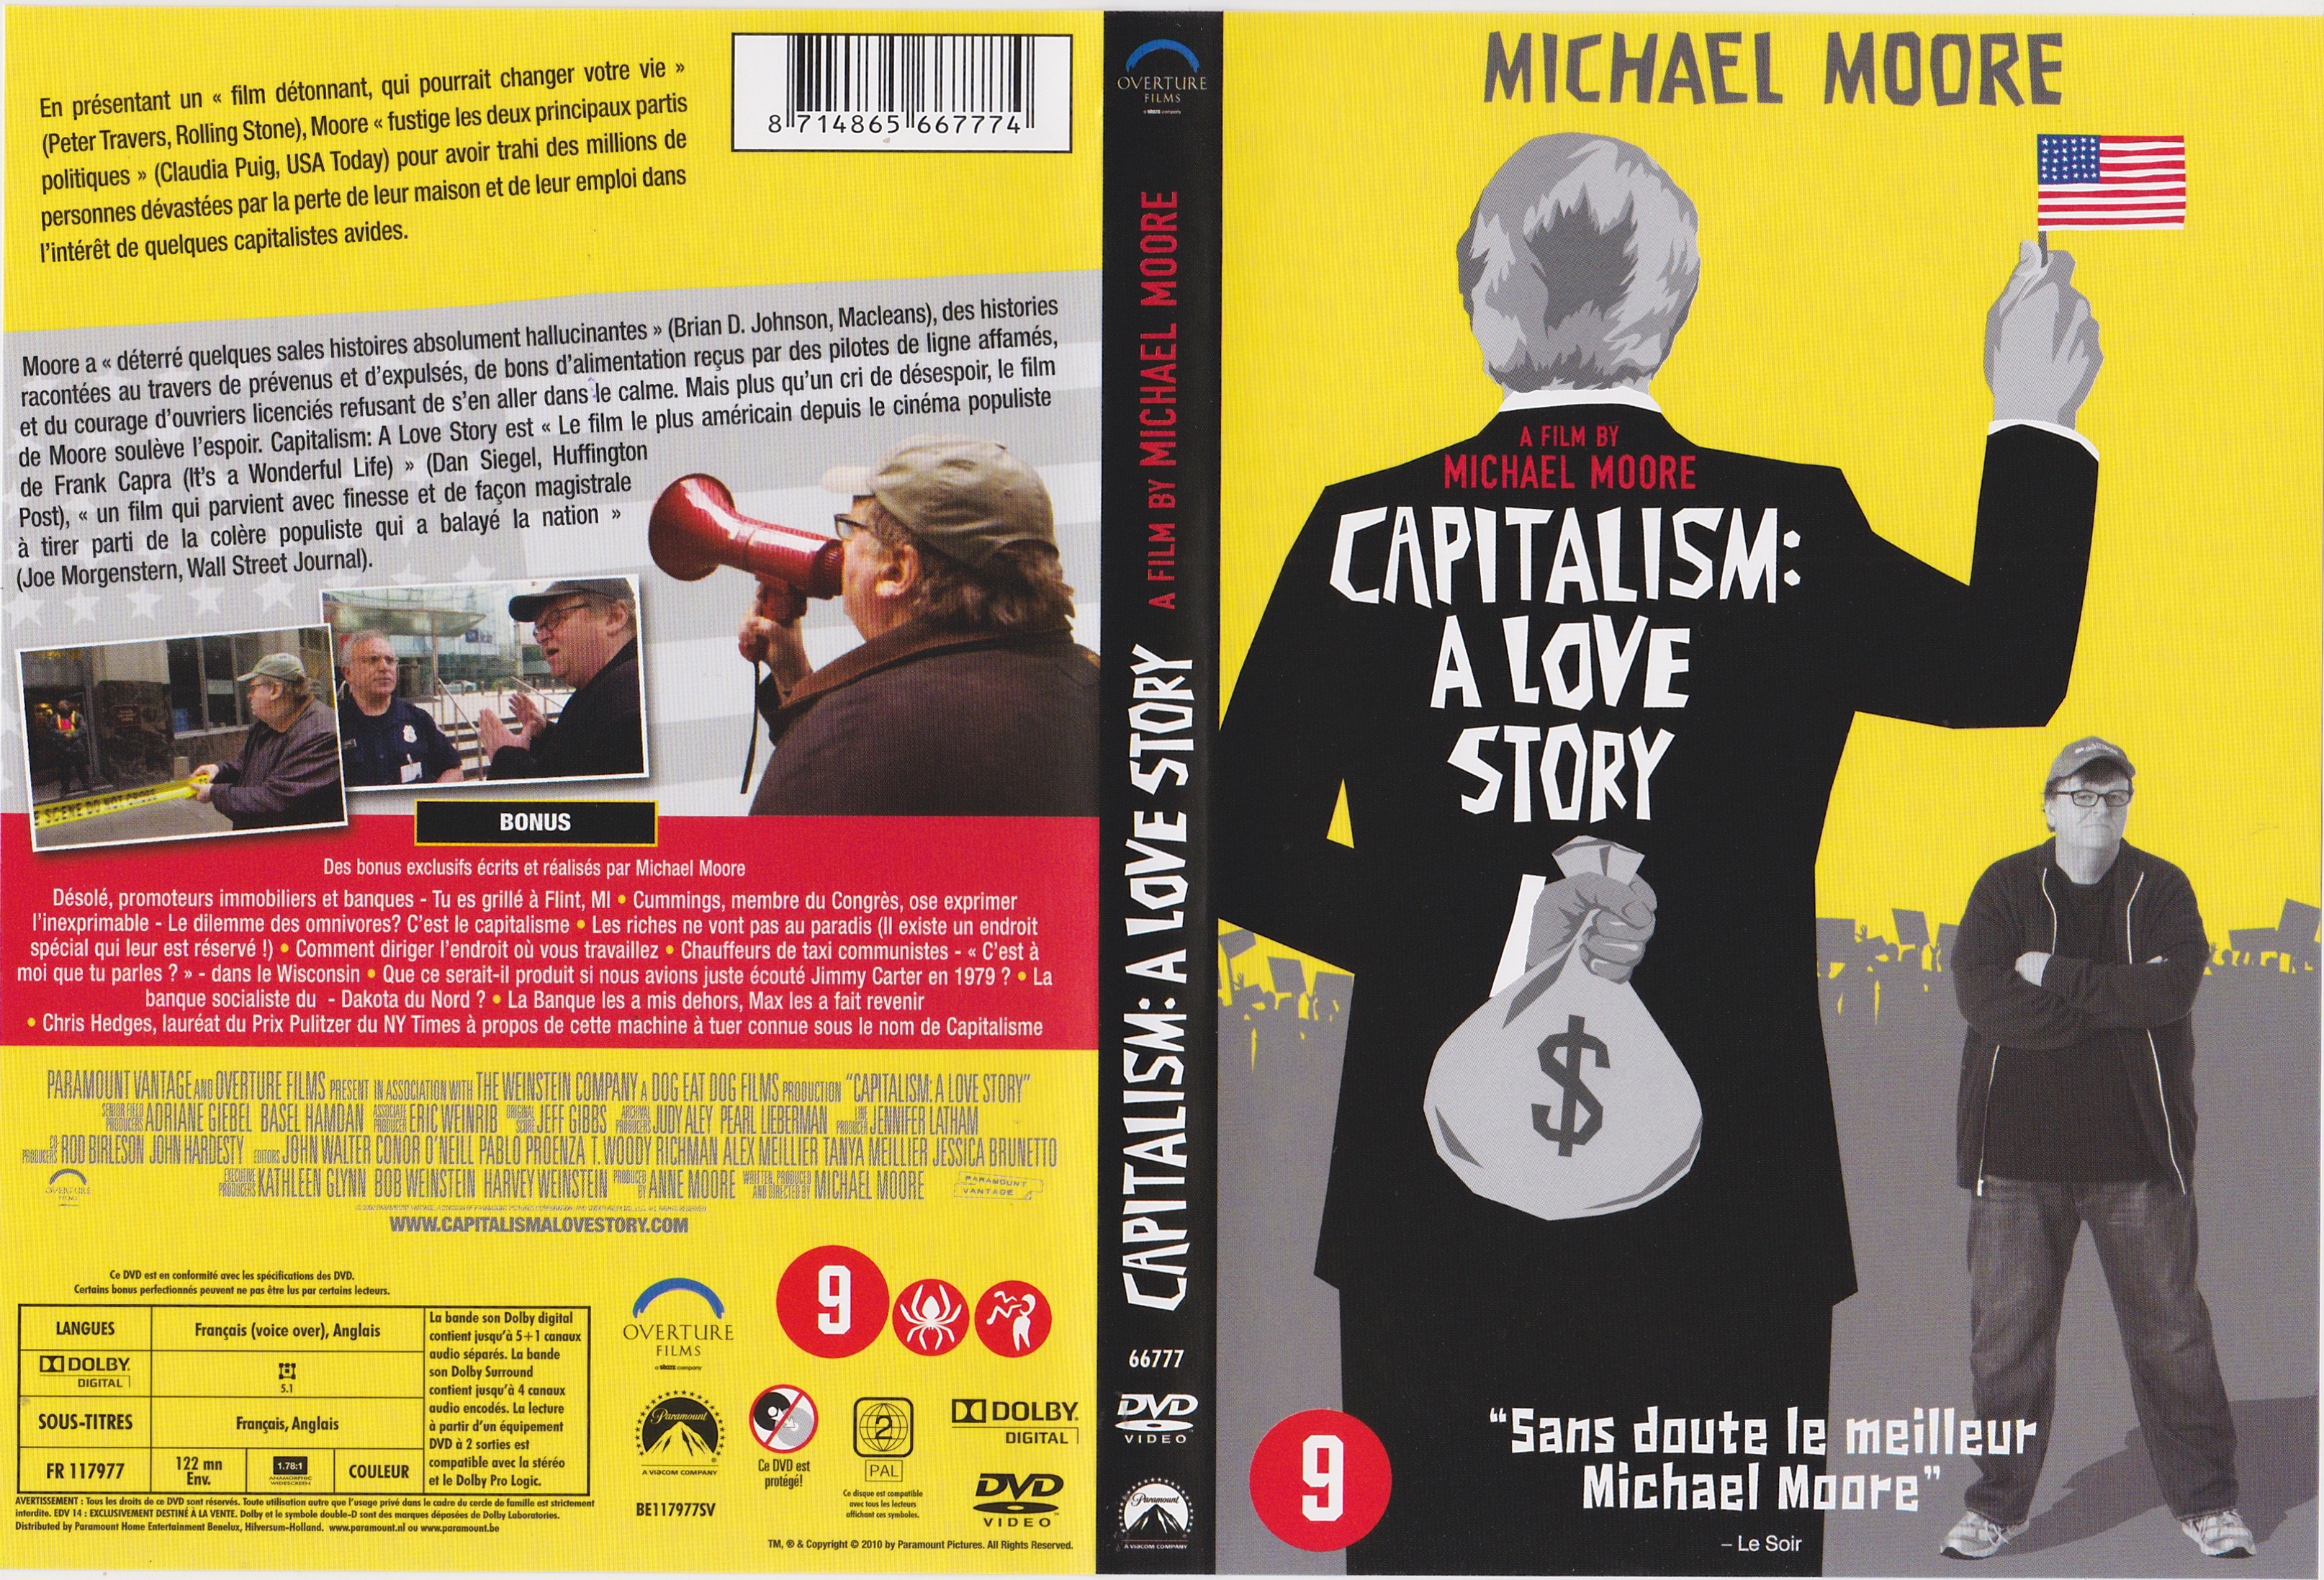 Jaquette DVD Capitalism A Love story